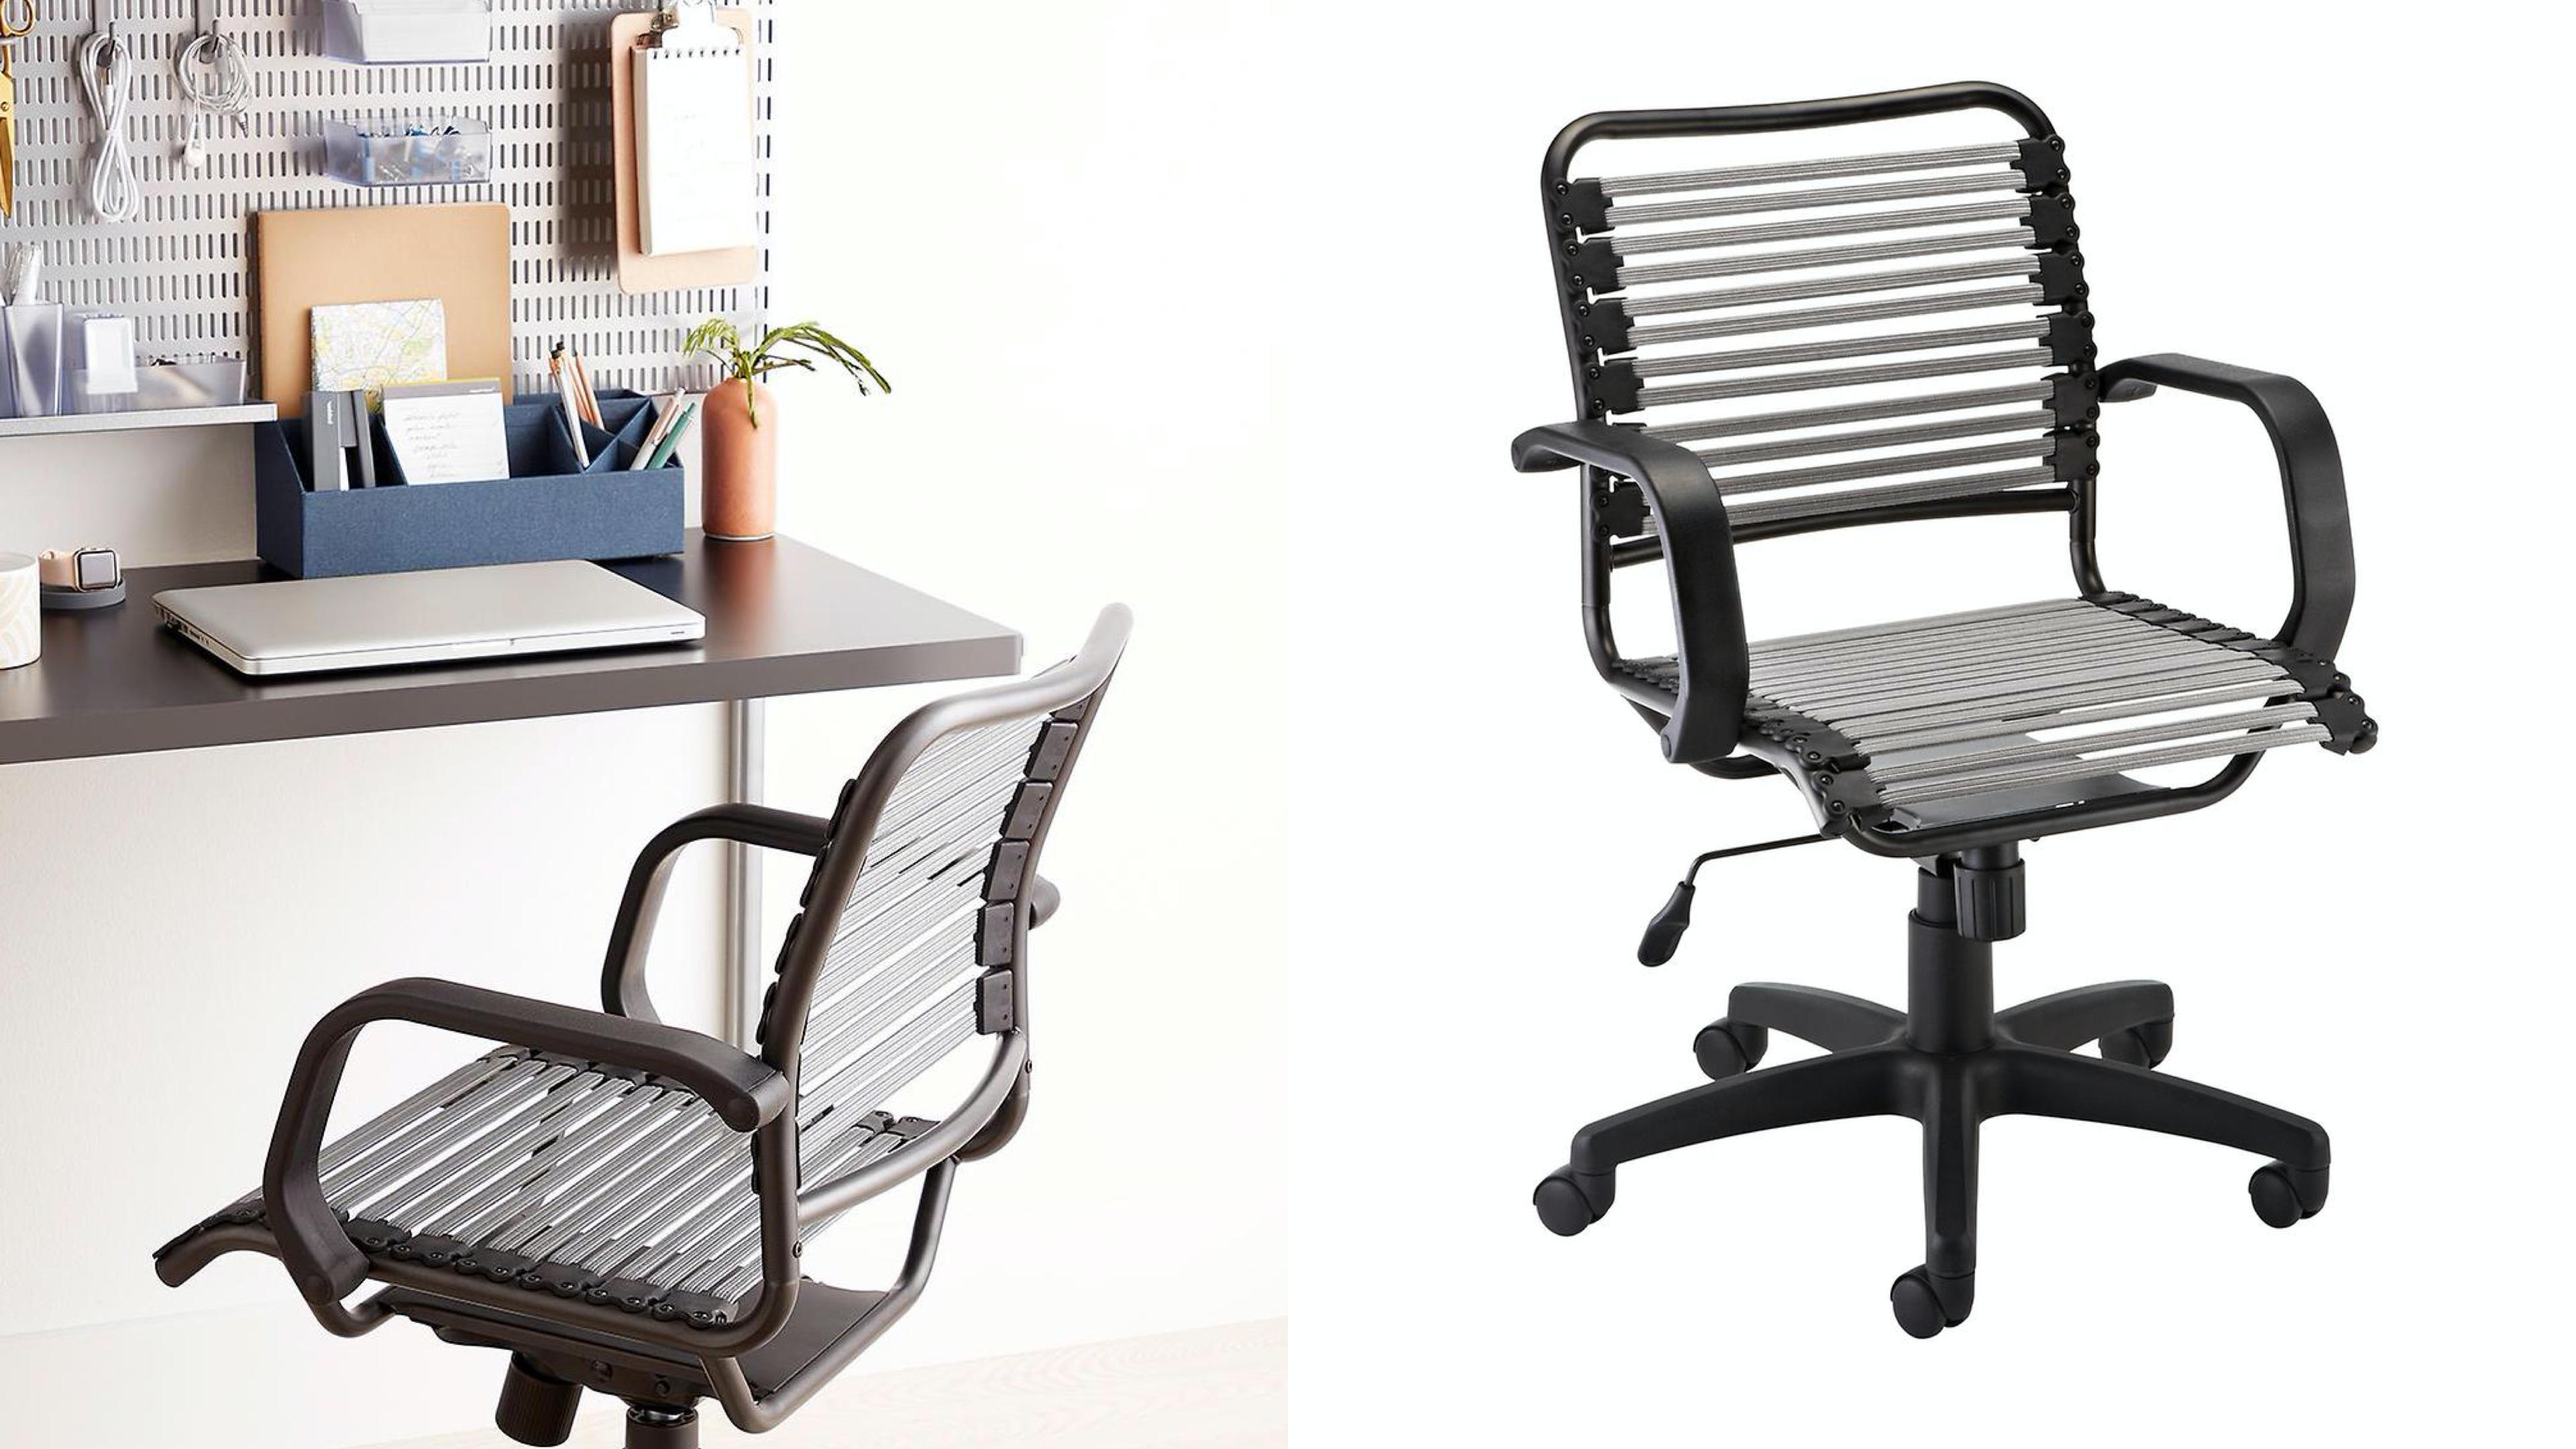 banded desk chair that is adjustable